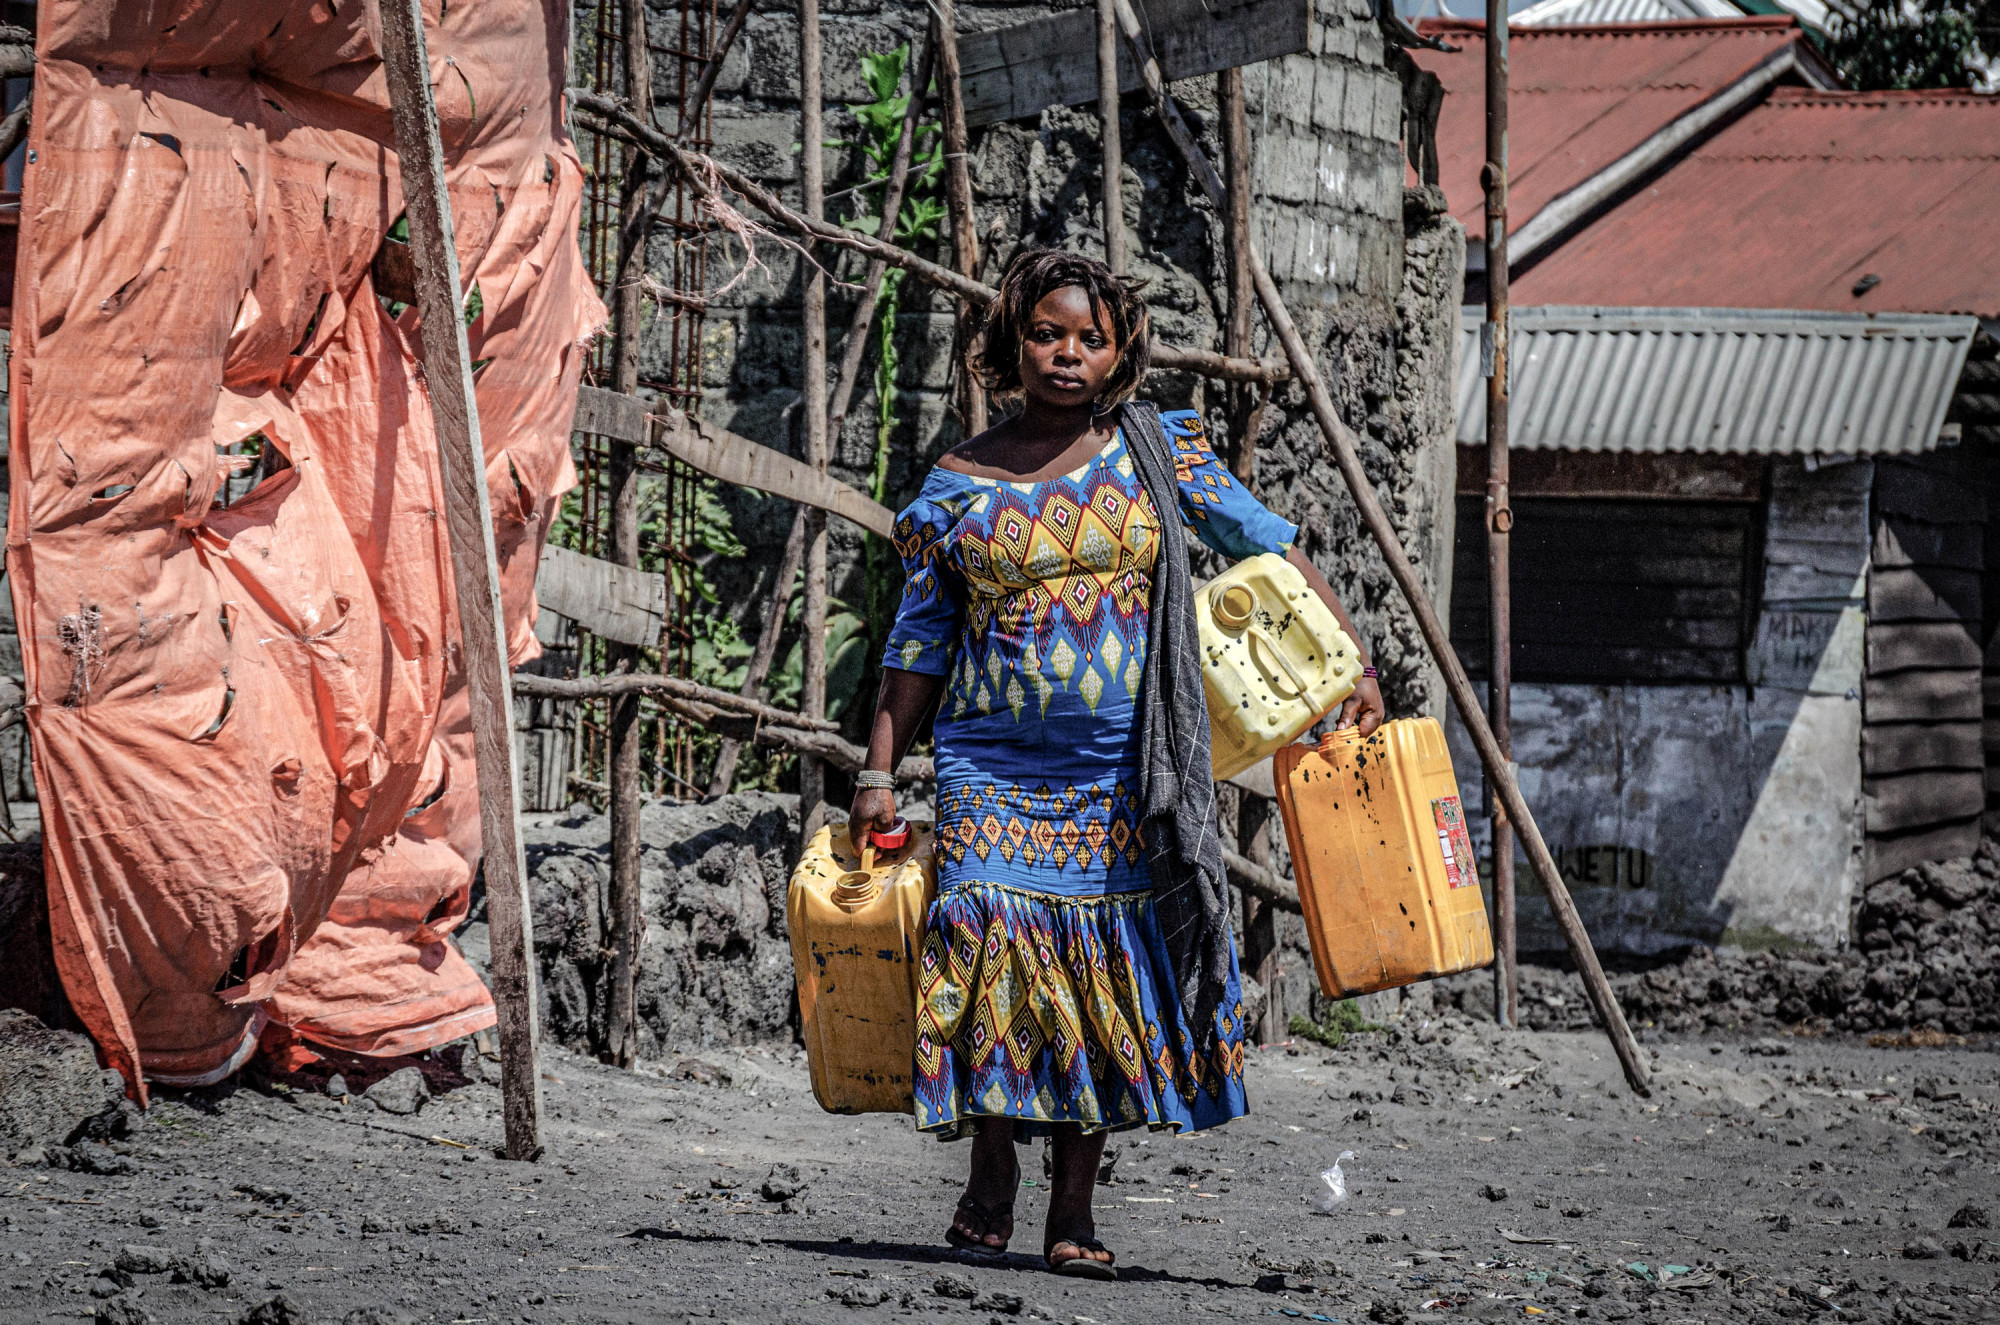 Goma, Democratic Republic of Congo, May 2020. A woman carries water containers in Goma, the capital of eastern Congo’s North Kivu Province last month. Congo’s state water provider Regideso promised free access to water at the start of the coronavirus outbreak in March, but with few people connected to water mains and poor service for those who are, the lack of water during the pandemic has made it difficult to adhere to health advisories and hygiene measures and has led to protests in Goma, which sits on the shores of Lake Kivu. © Arlette Bashizi for Fondation Carmignac